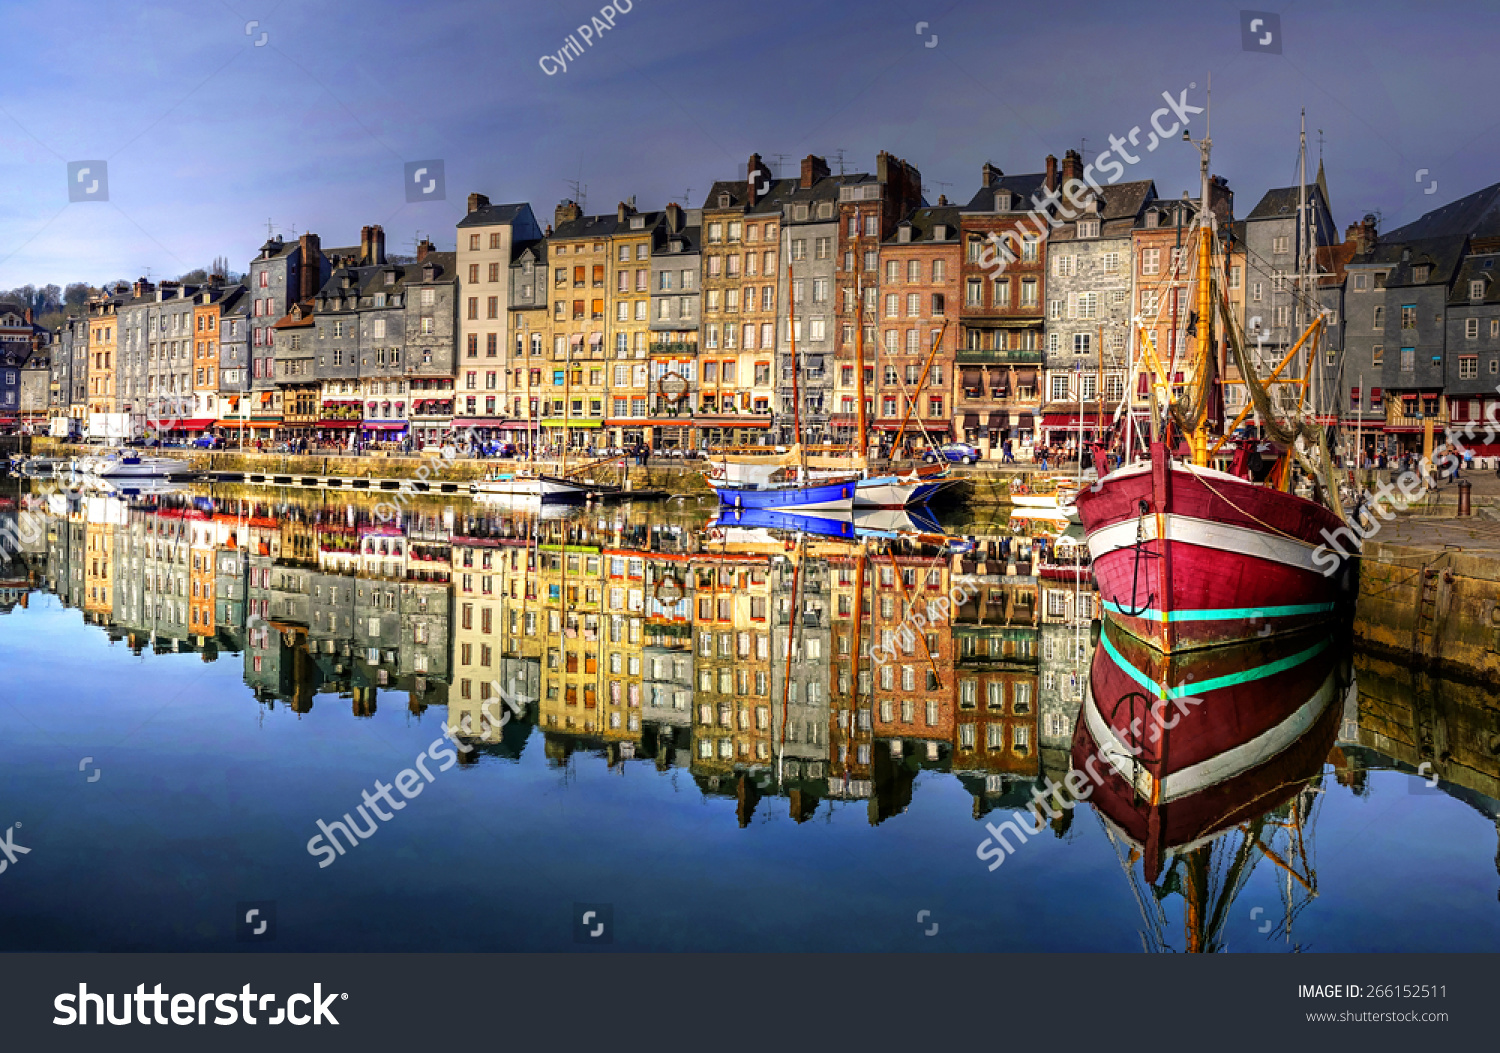 Honfleur, Normandy City In France Stock Photo 266152511 : Shutterstock